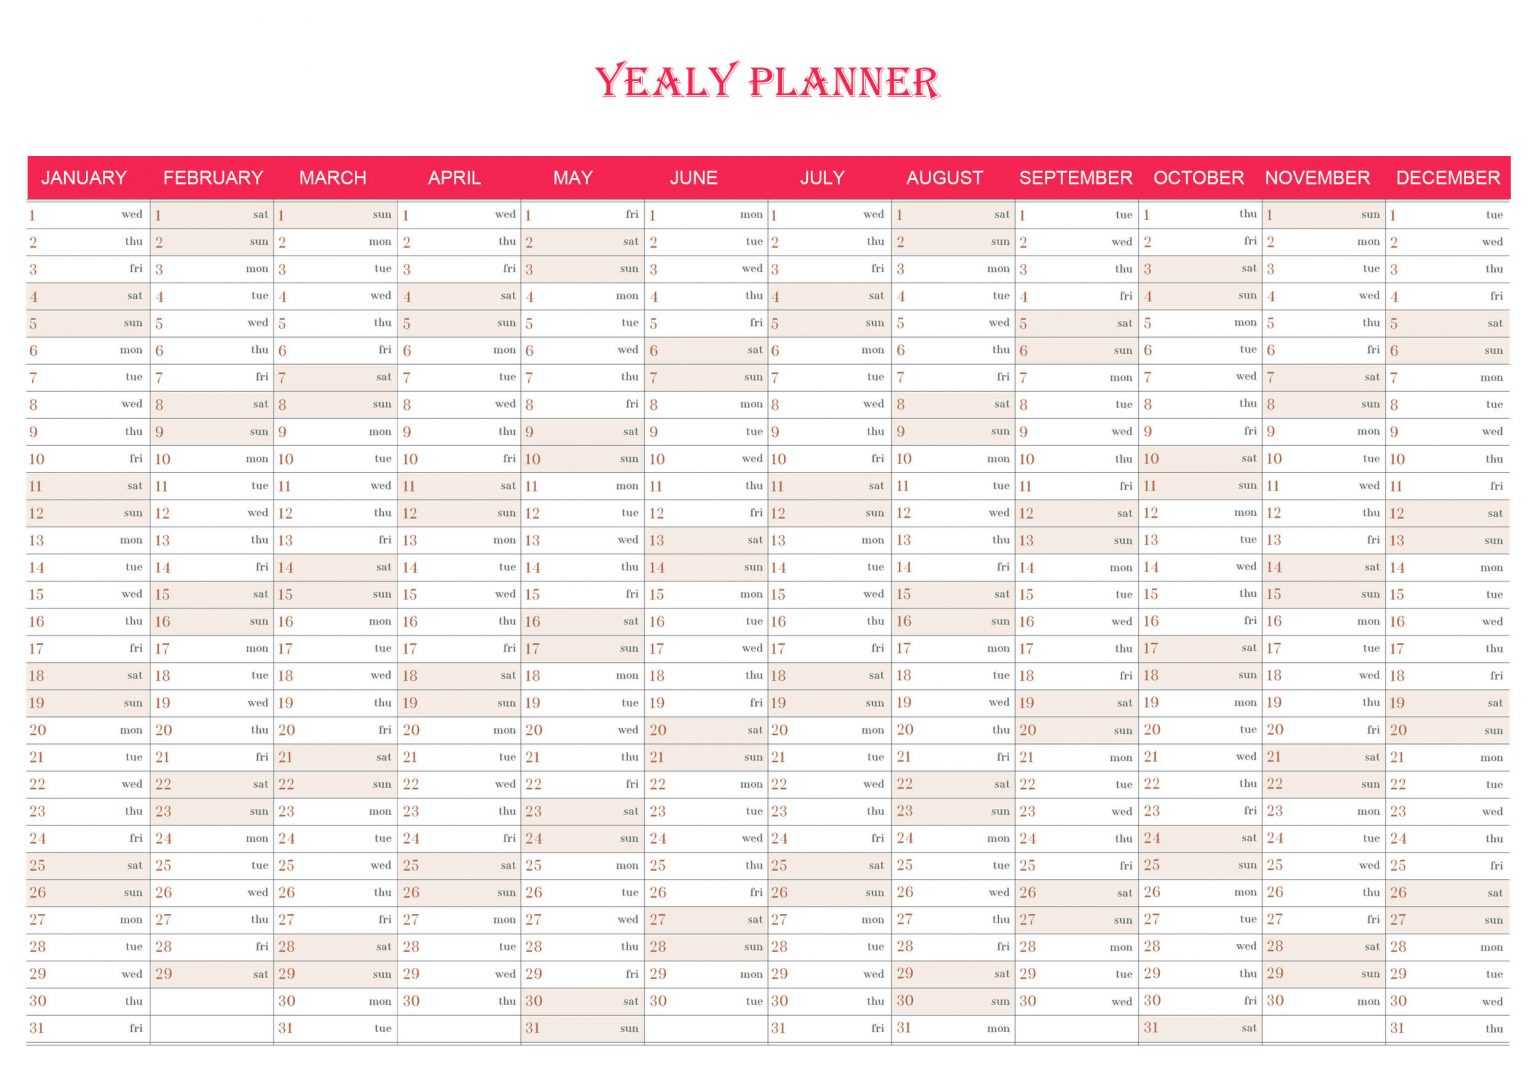 Free Printable Yearly Planner Template in PDF Word Excel